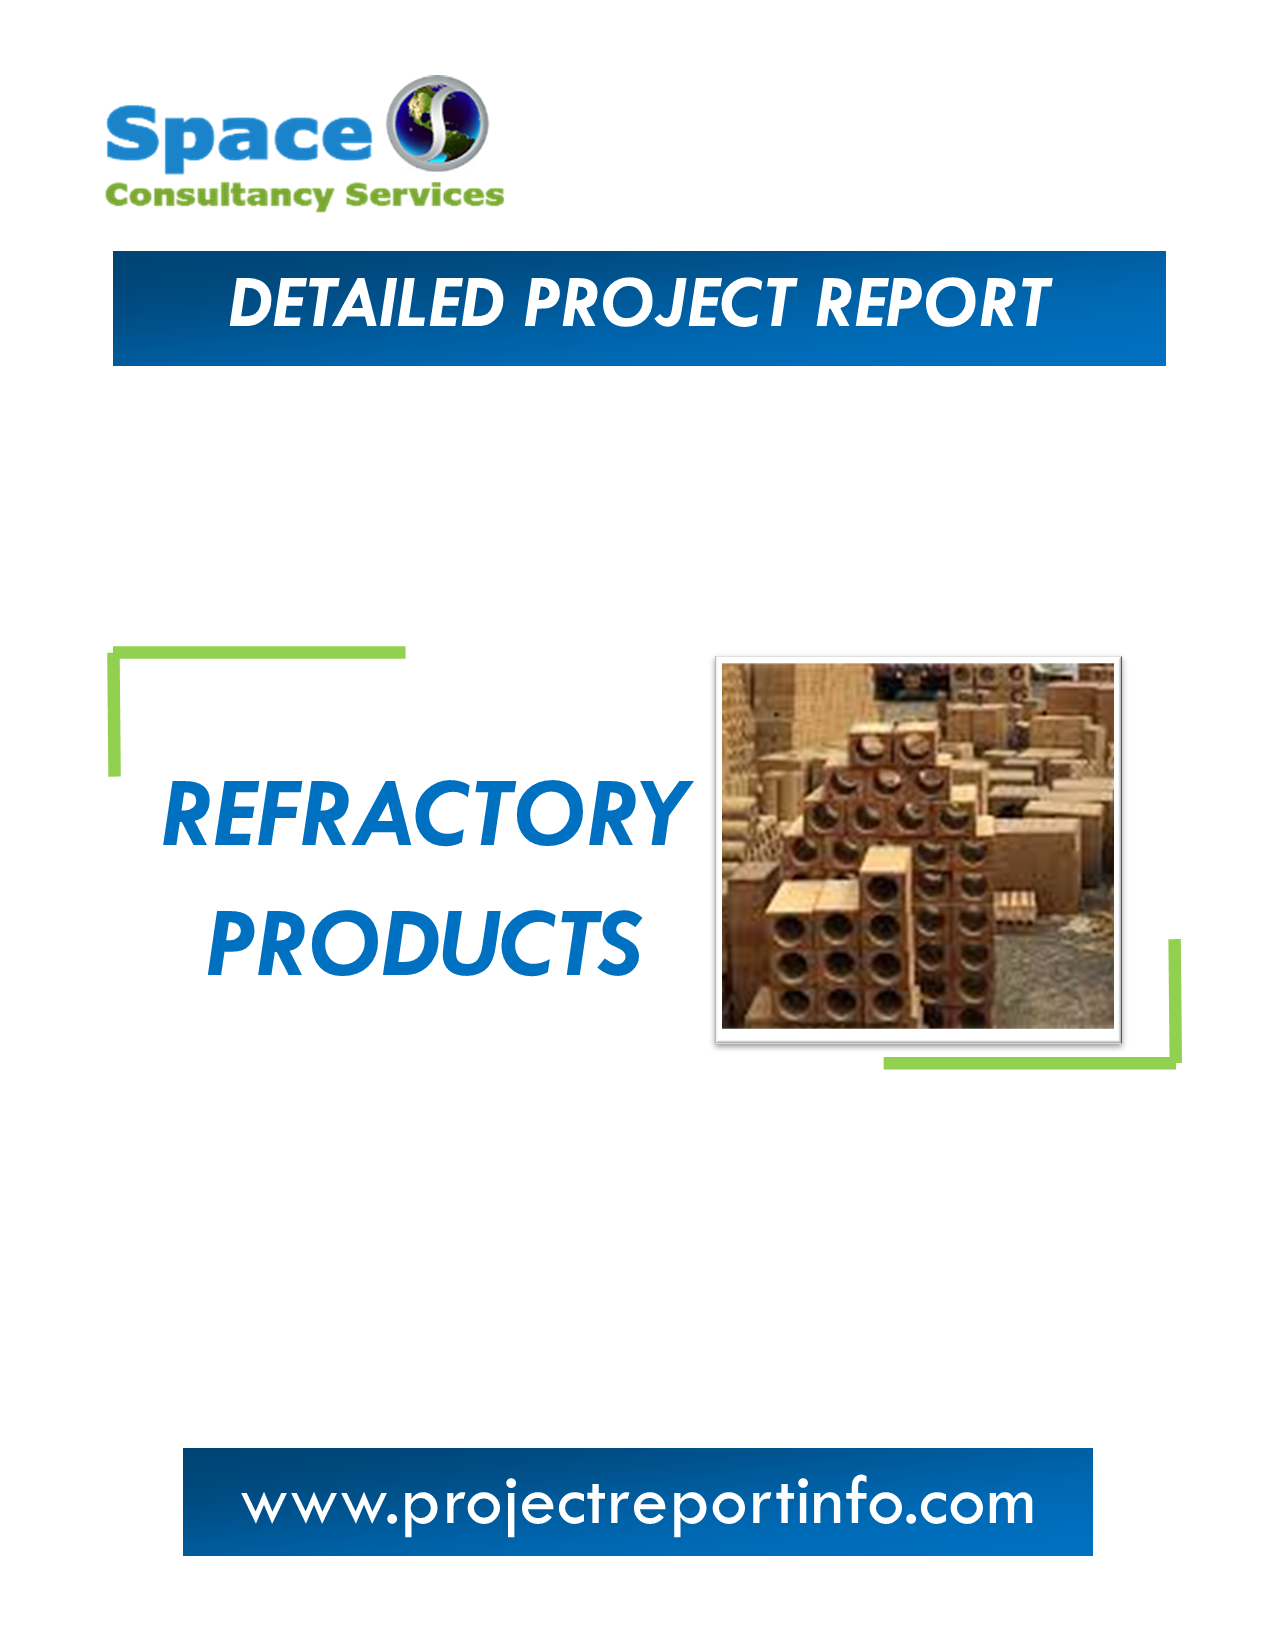 Project Report on Refractory Products Manufacturing